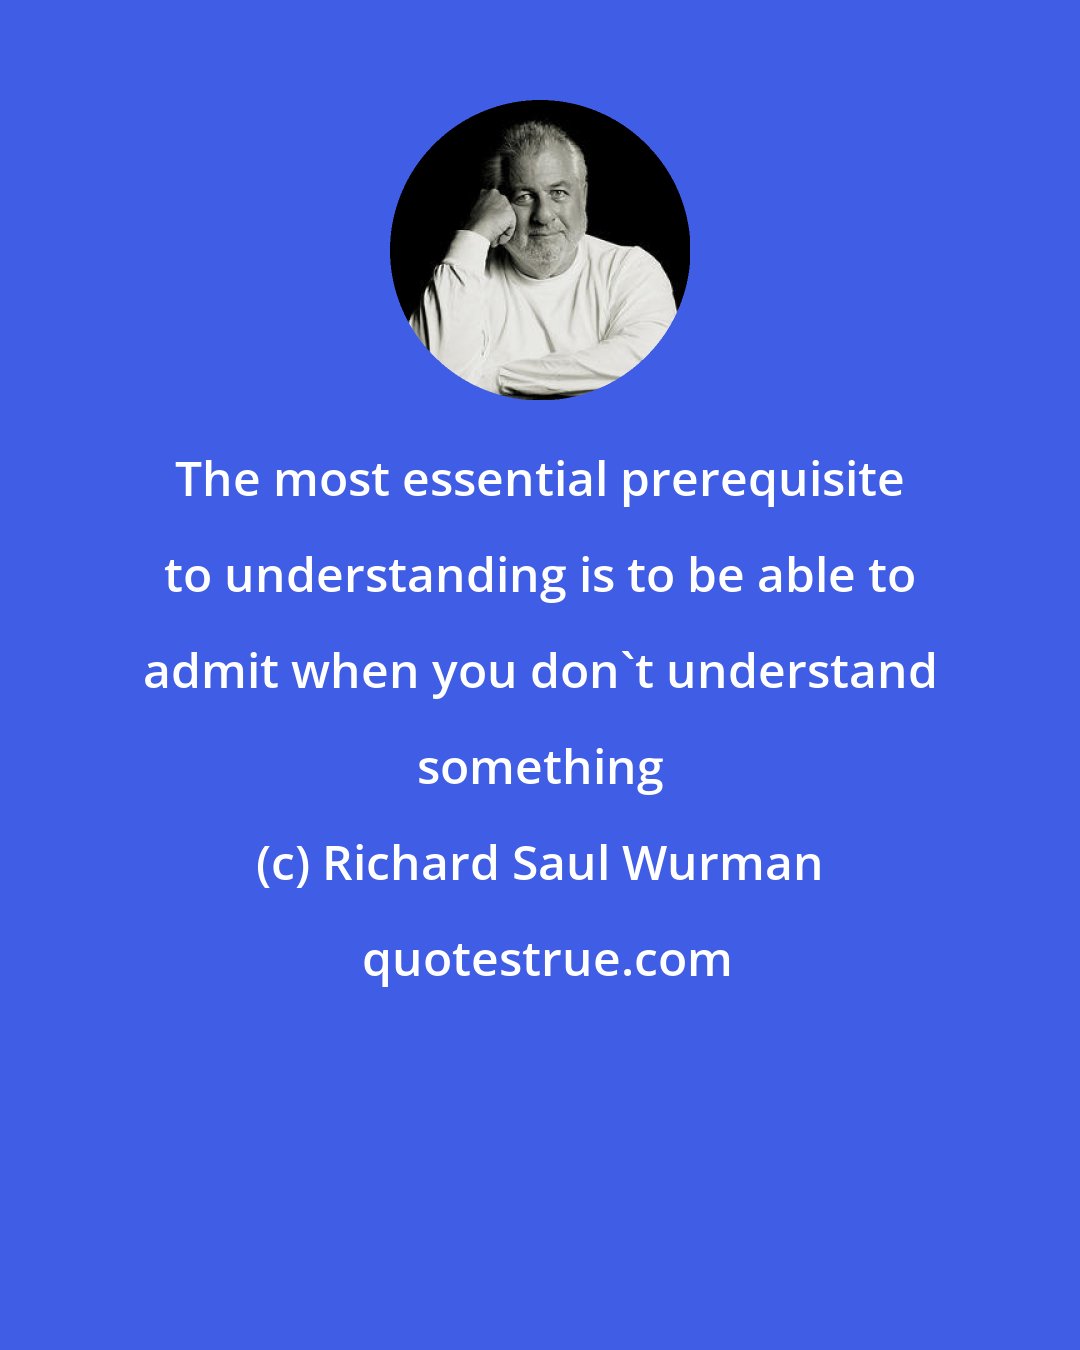 Richard Saul Wurman: The most essential prerequisite to understanding is to be able to admit when you don't understand something